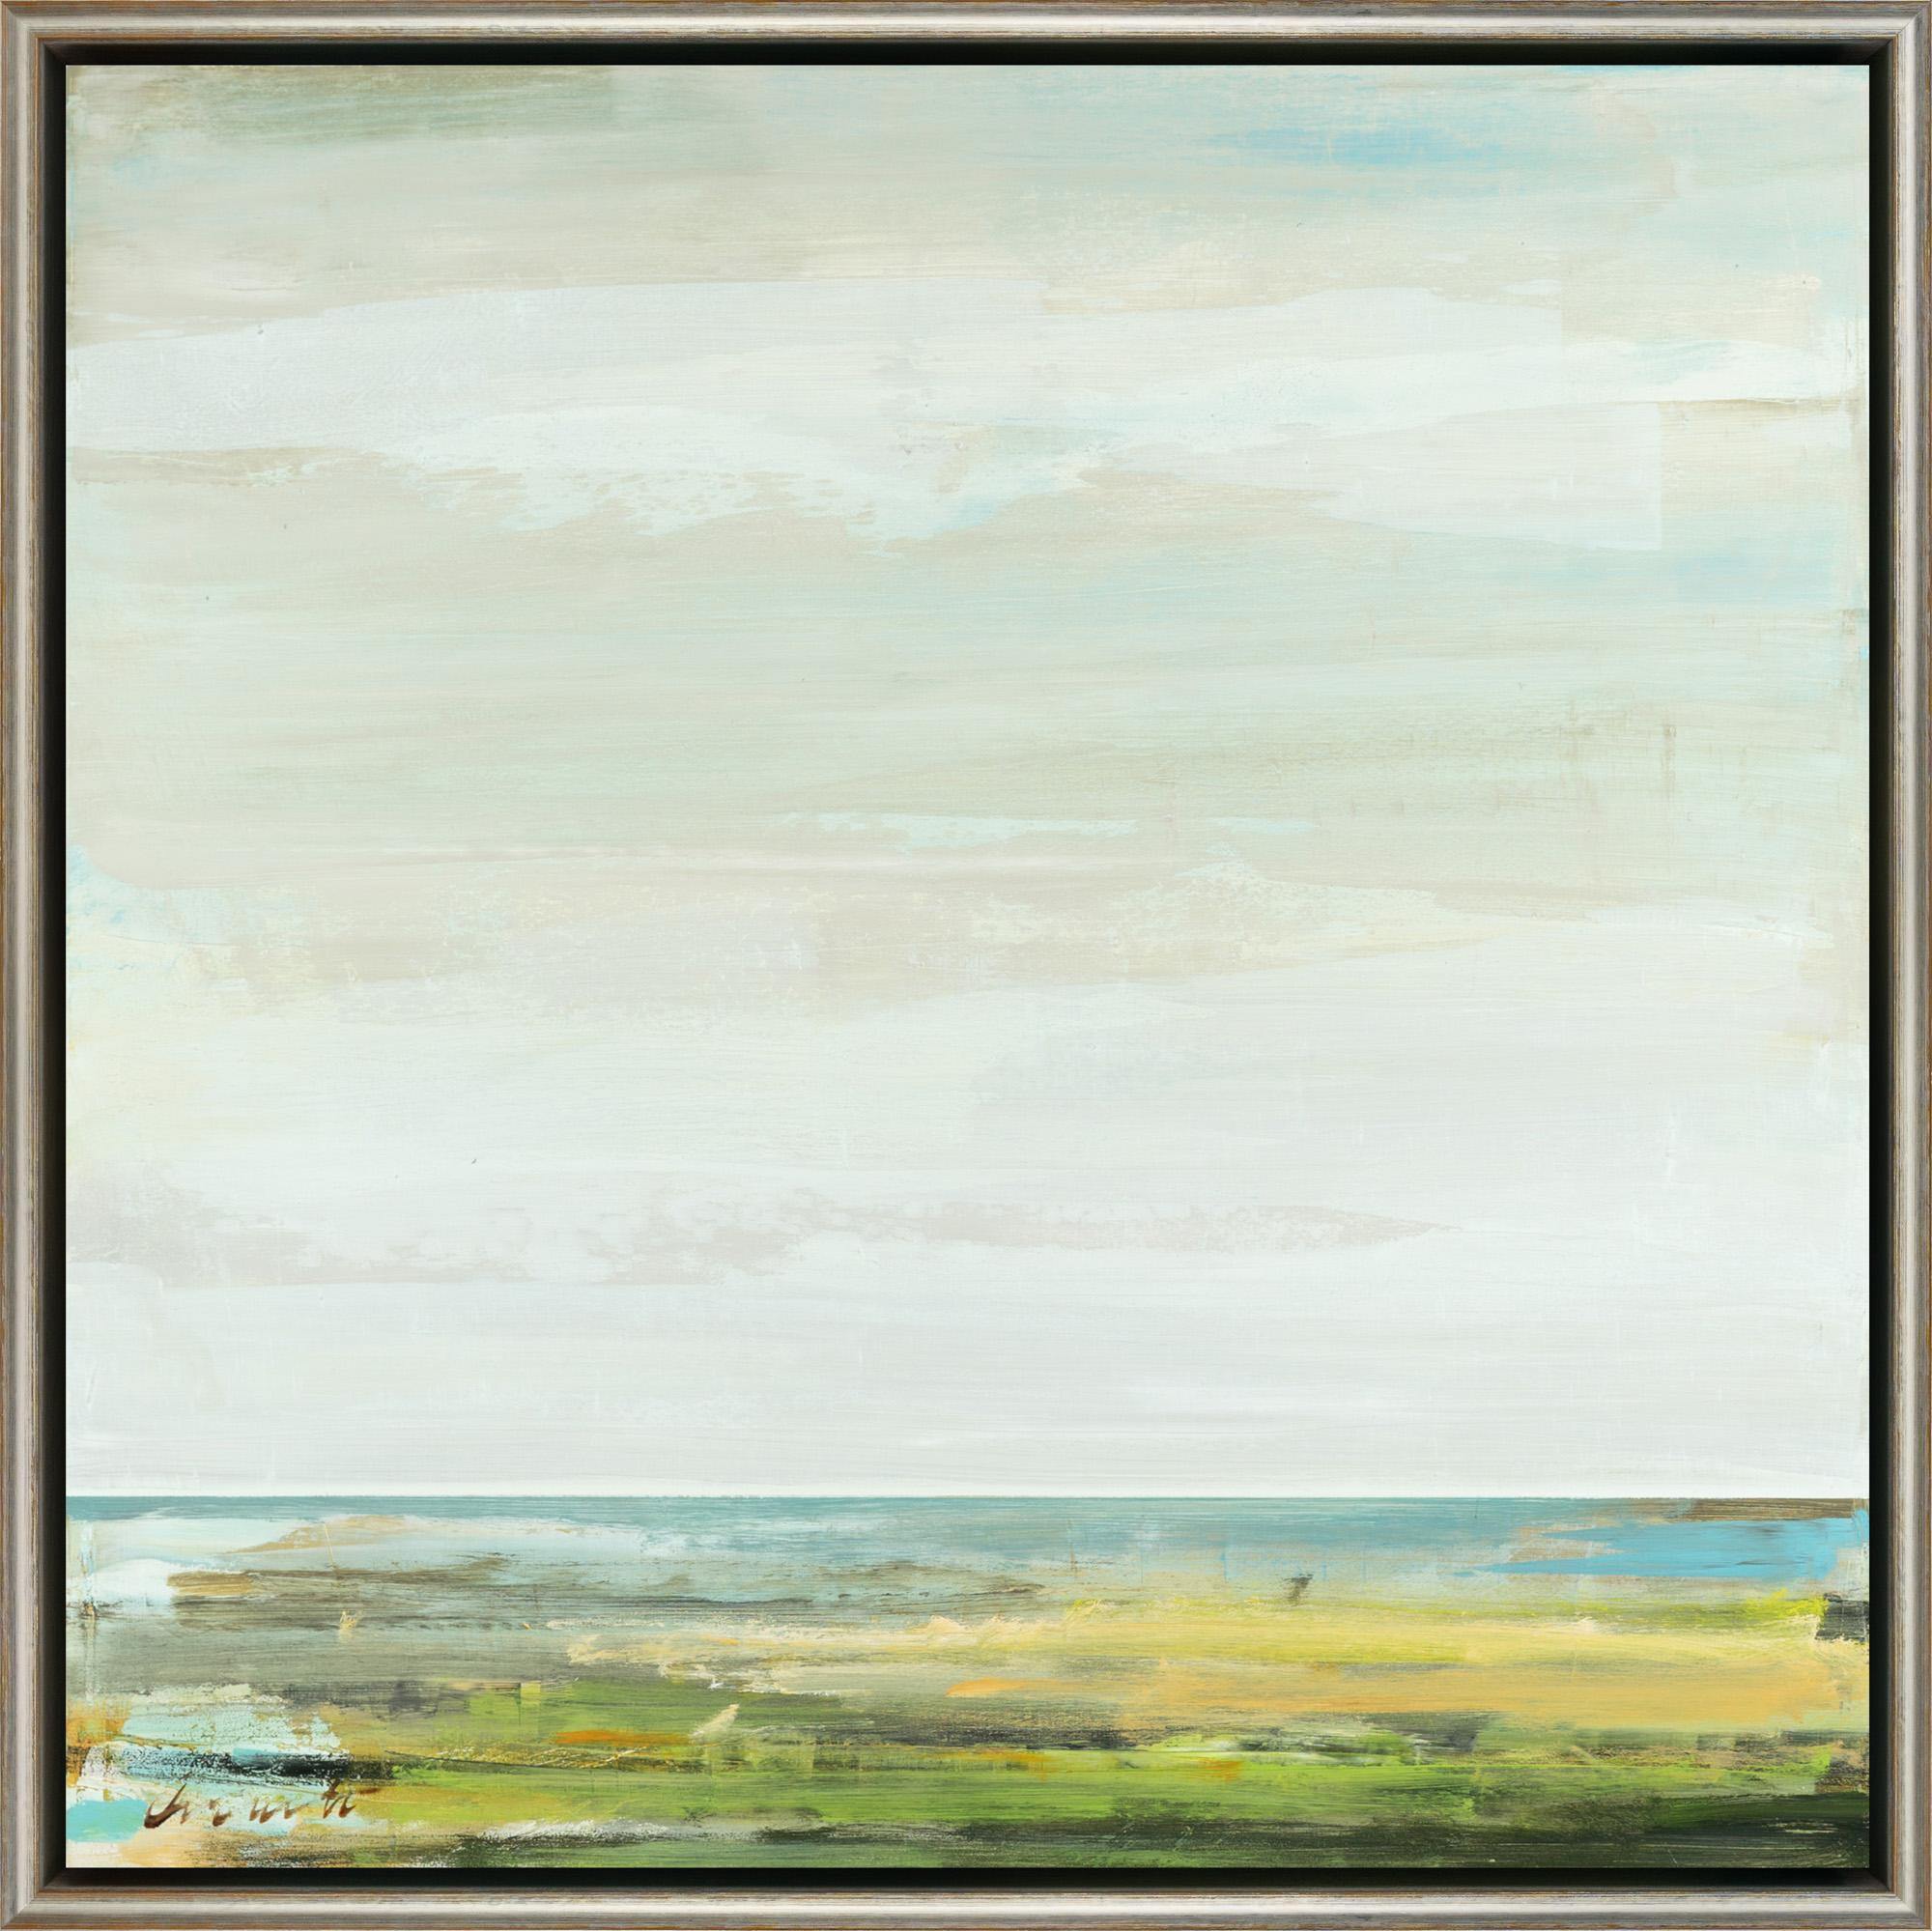 Eric Abrecht Landscape Painting - "Reserved Horizon IV" Abstracted Landscape Waterscape, Oil on Panel Painting